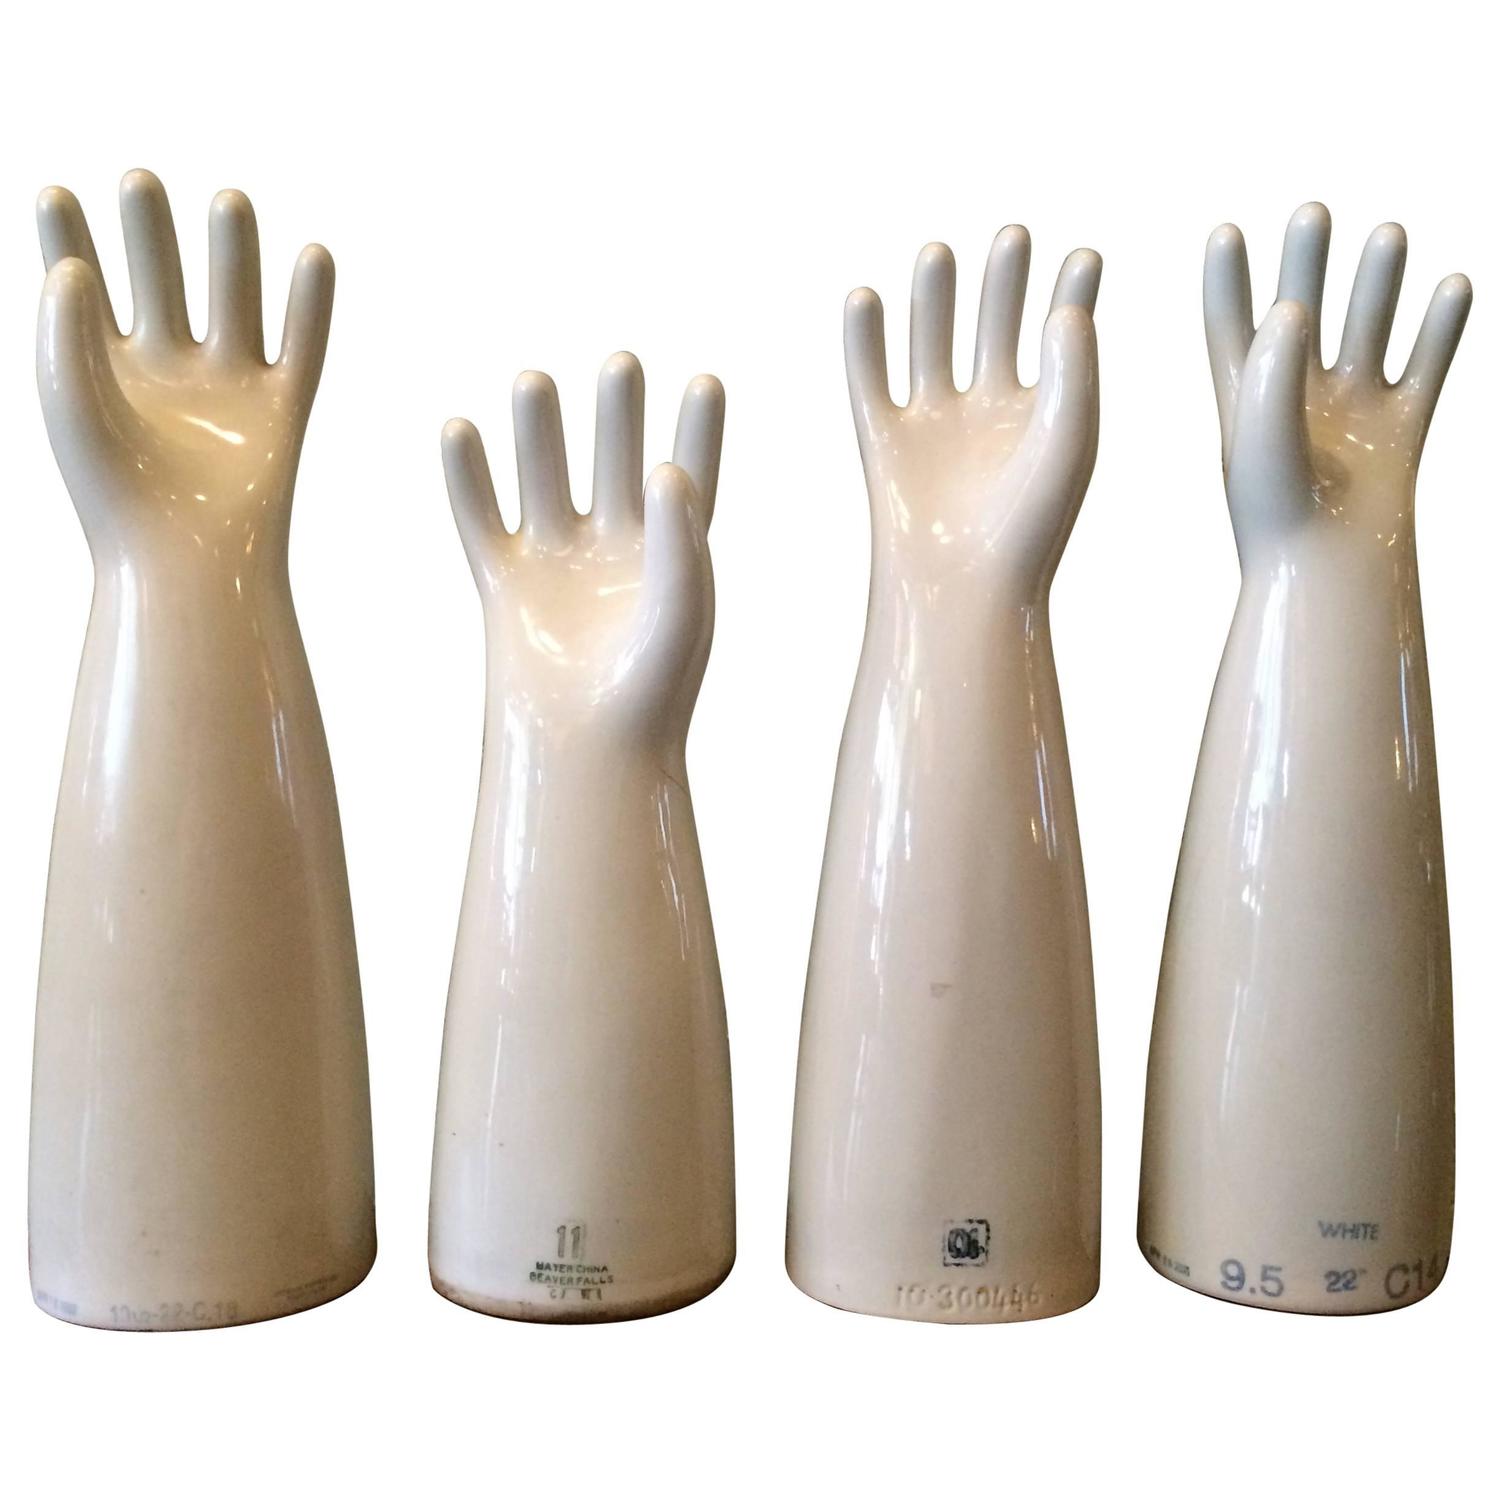 Large Industrial Mid-Century Porcelain Glove Molds For Sale at 1stdibs